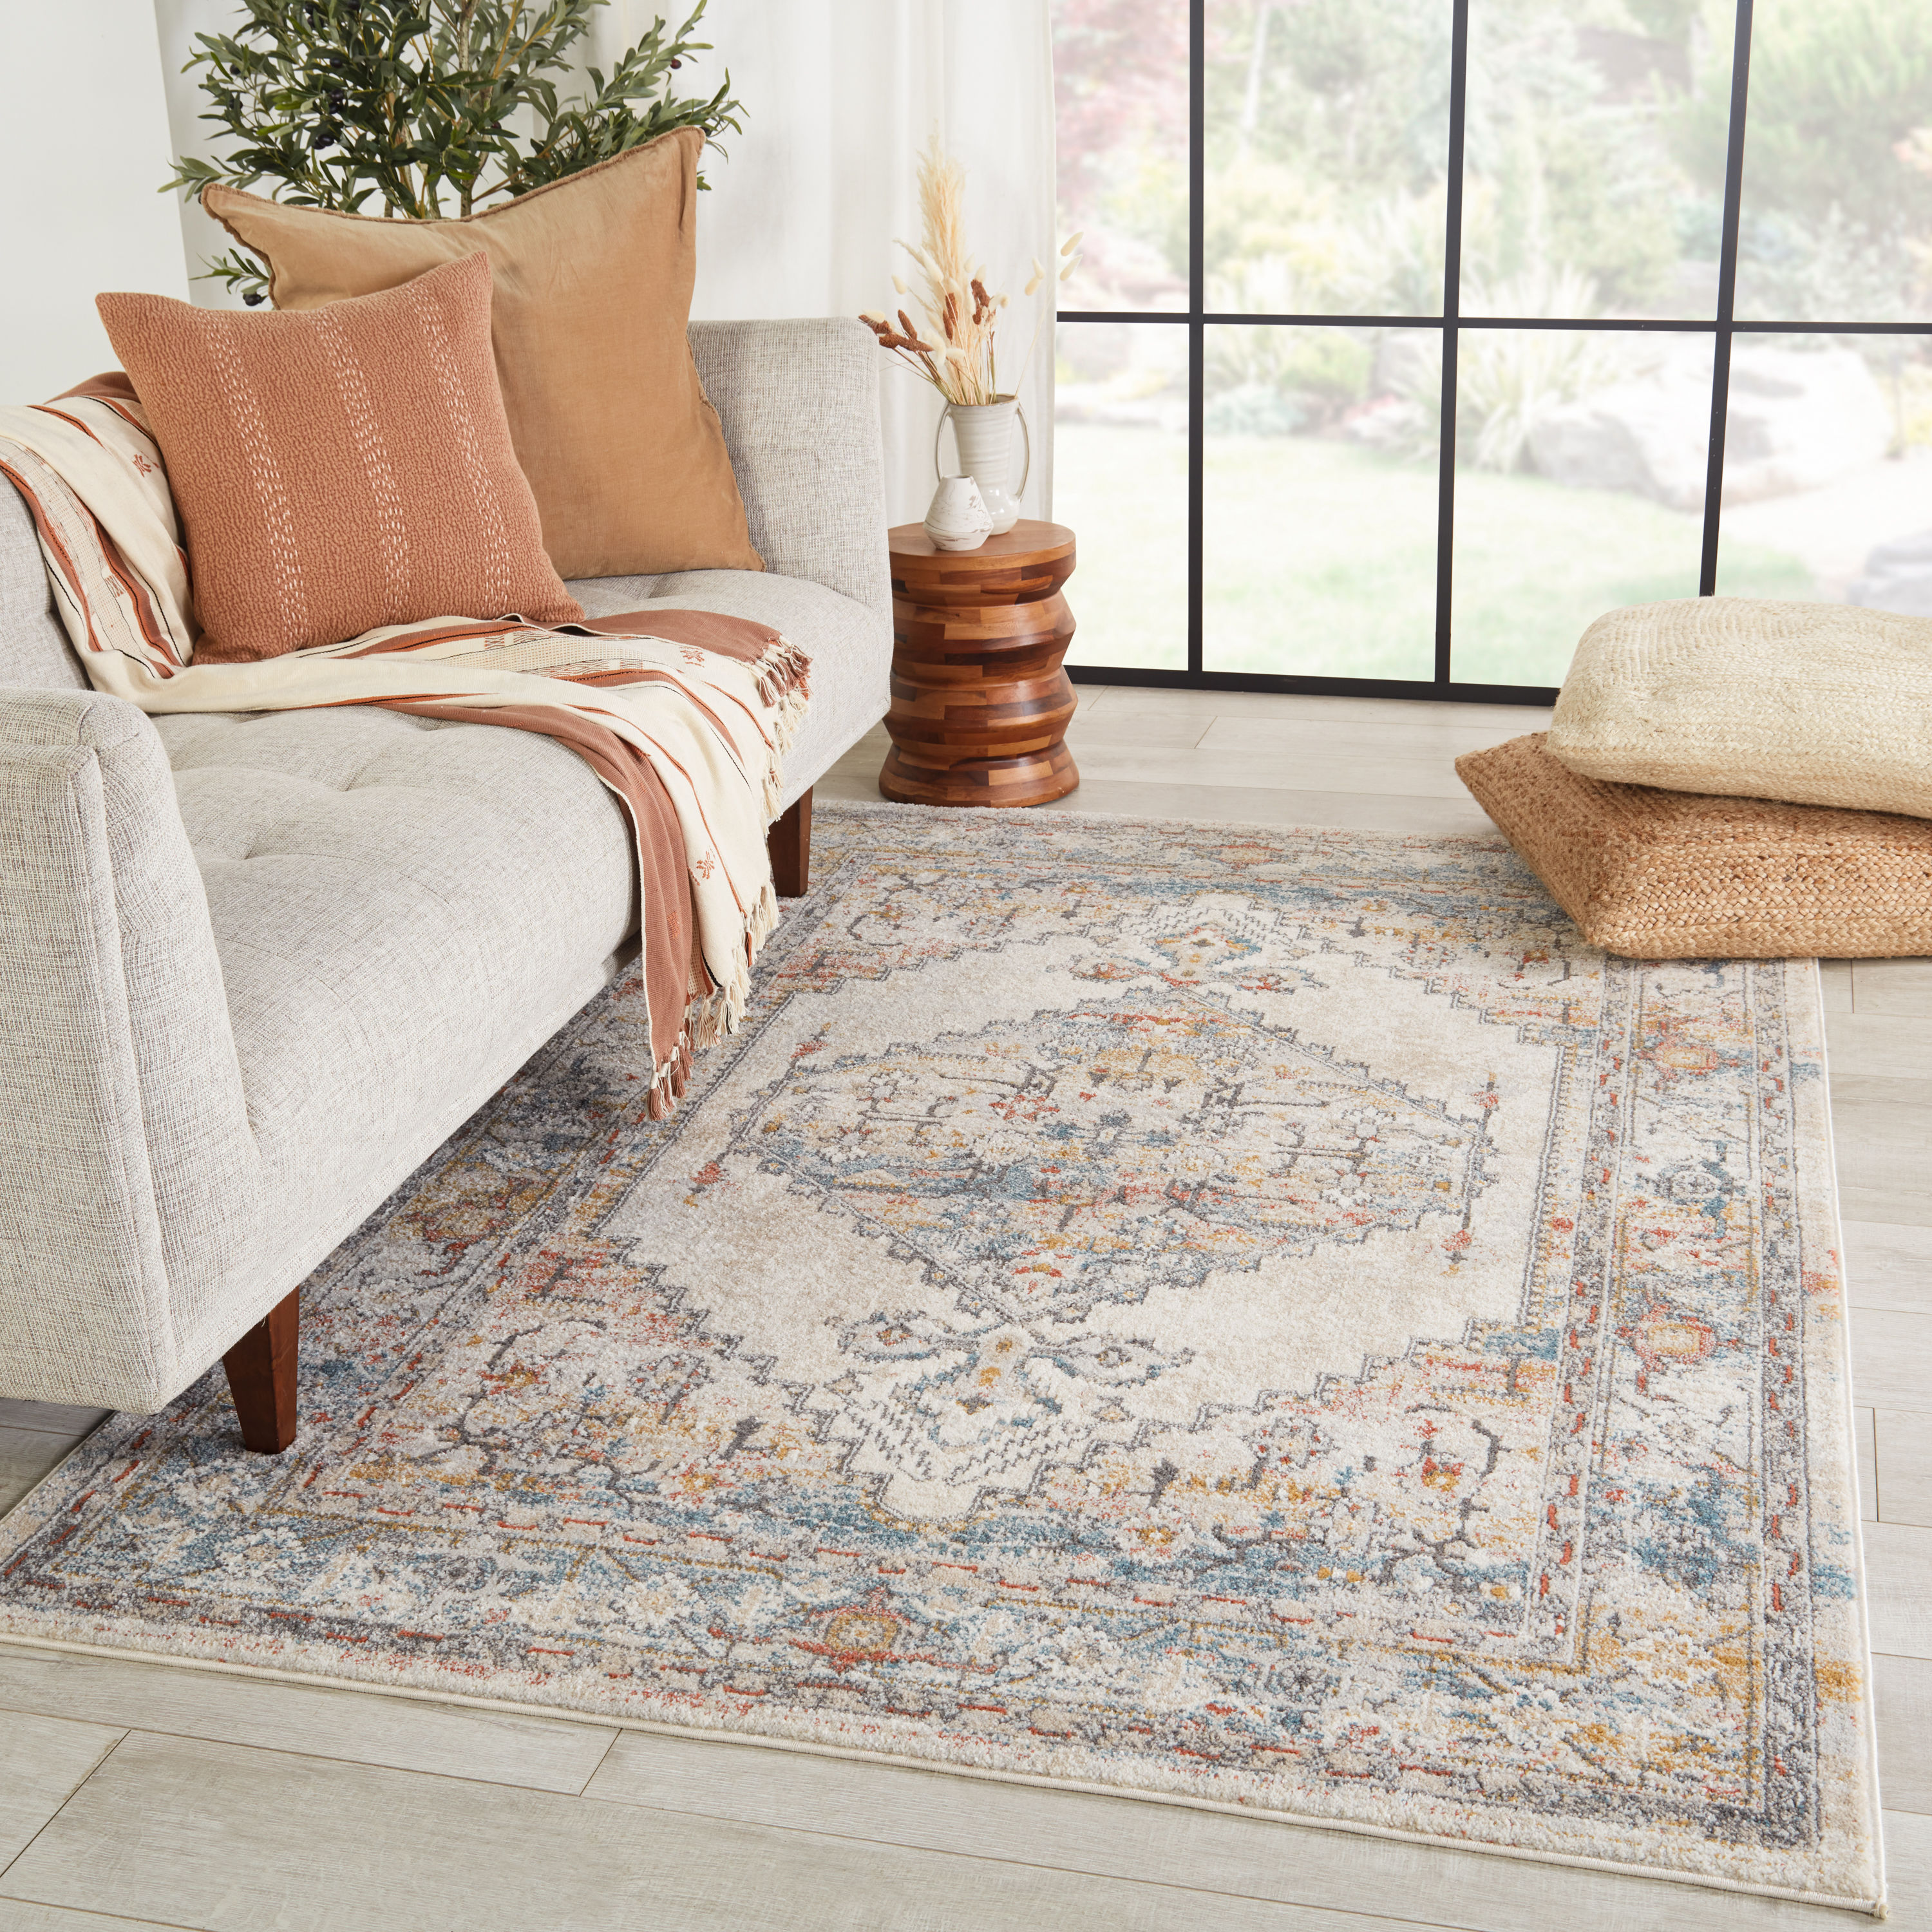 Style Selections Damask Rugs at Lowes.com